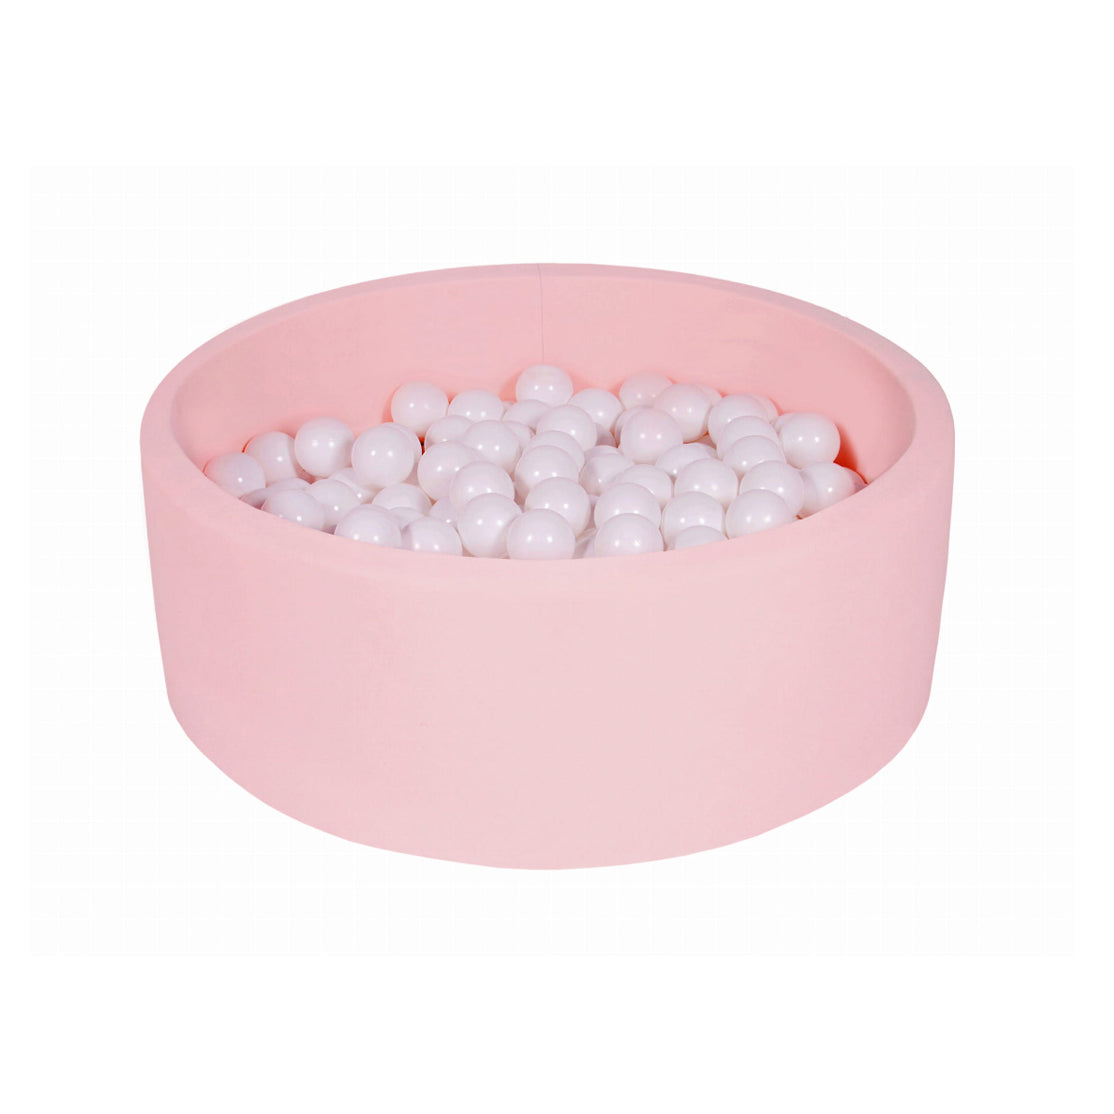 Cotton Round Ball Pit, Pink (Choose your own ball colours)